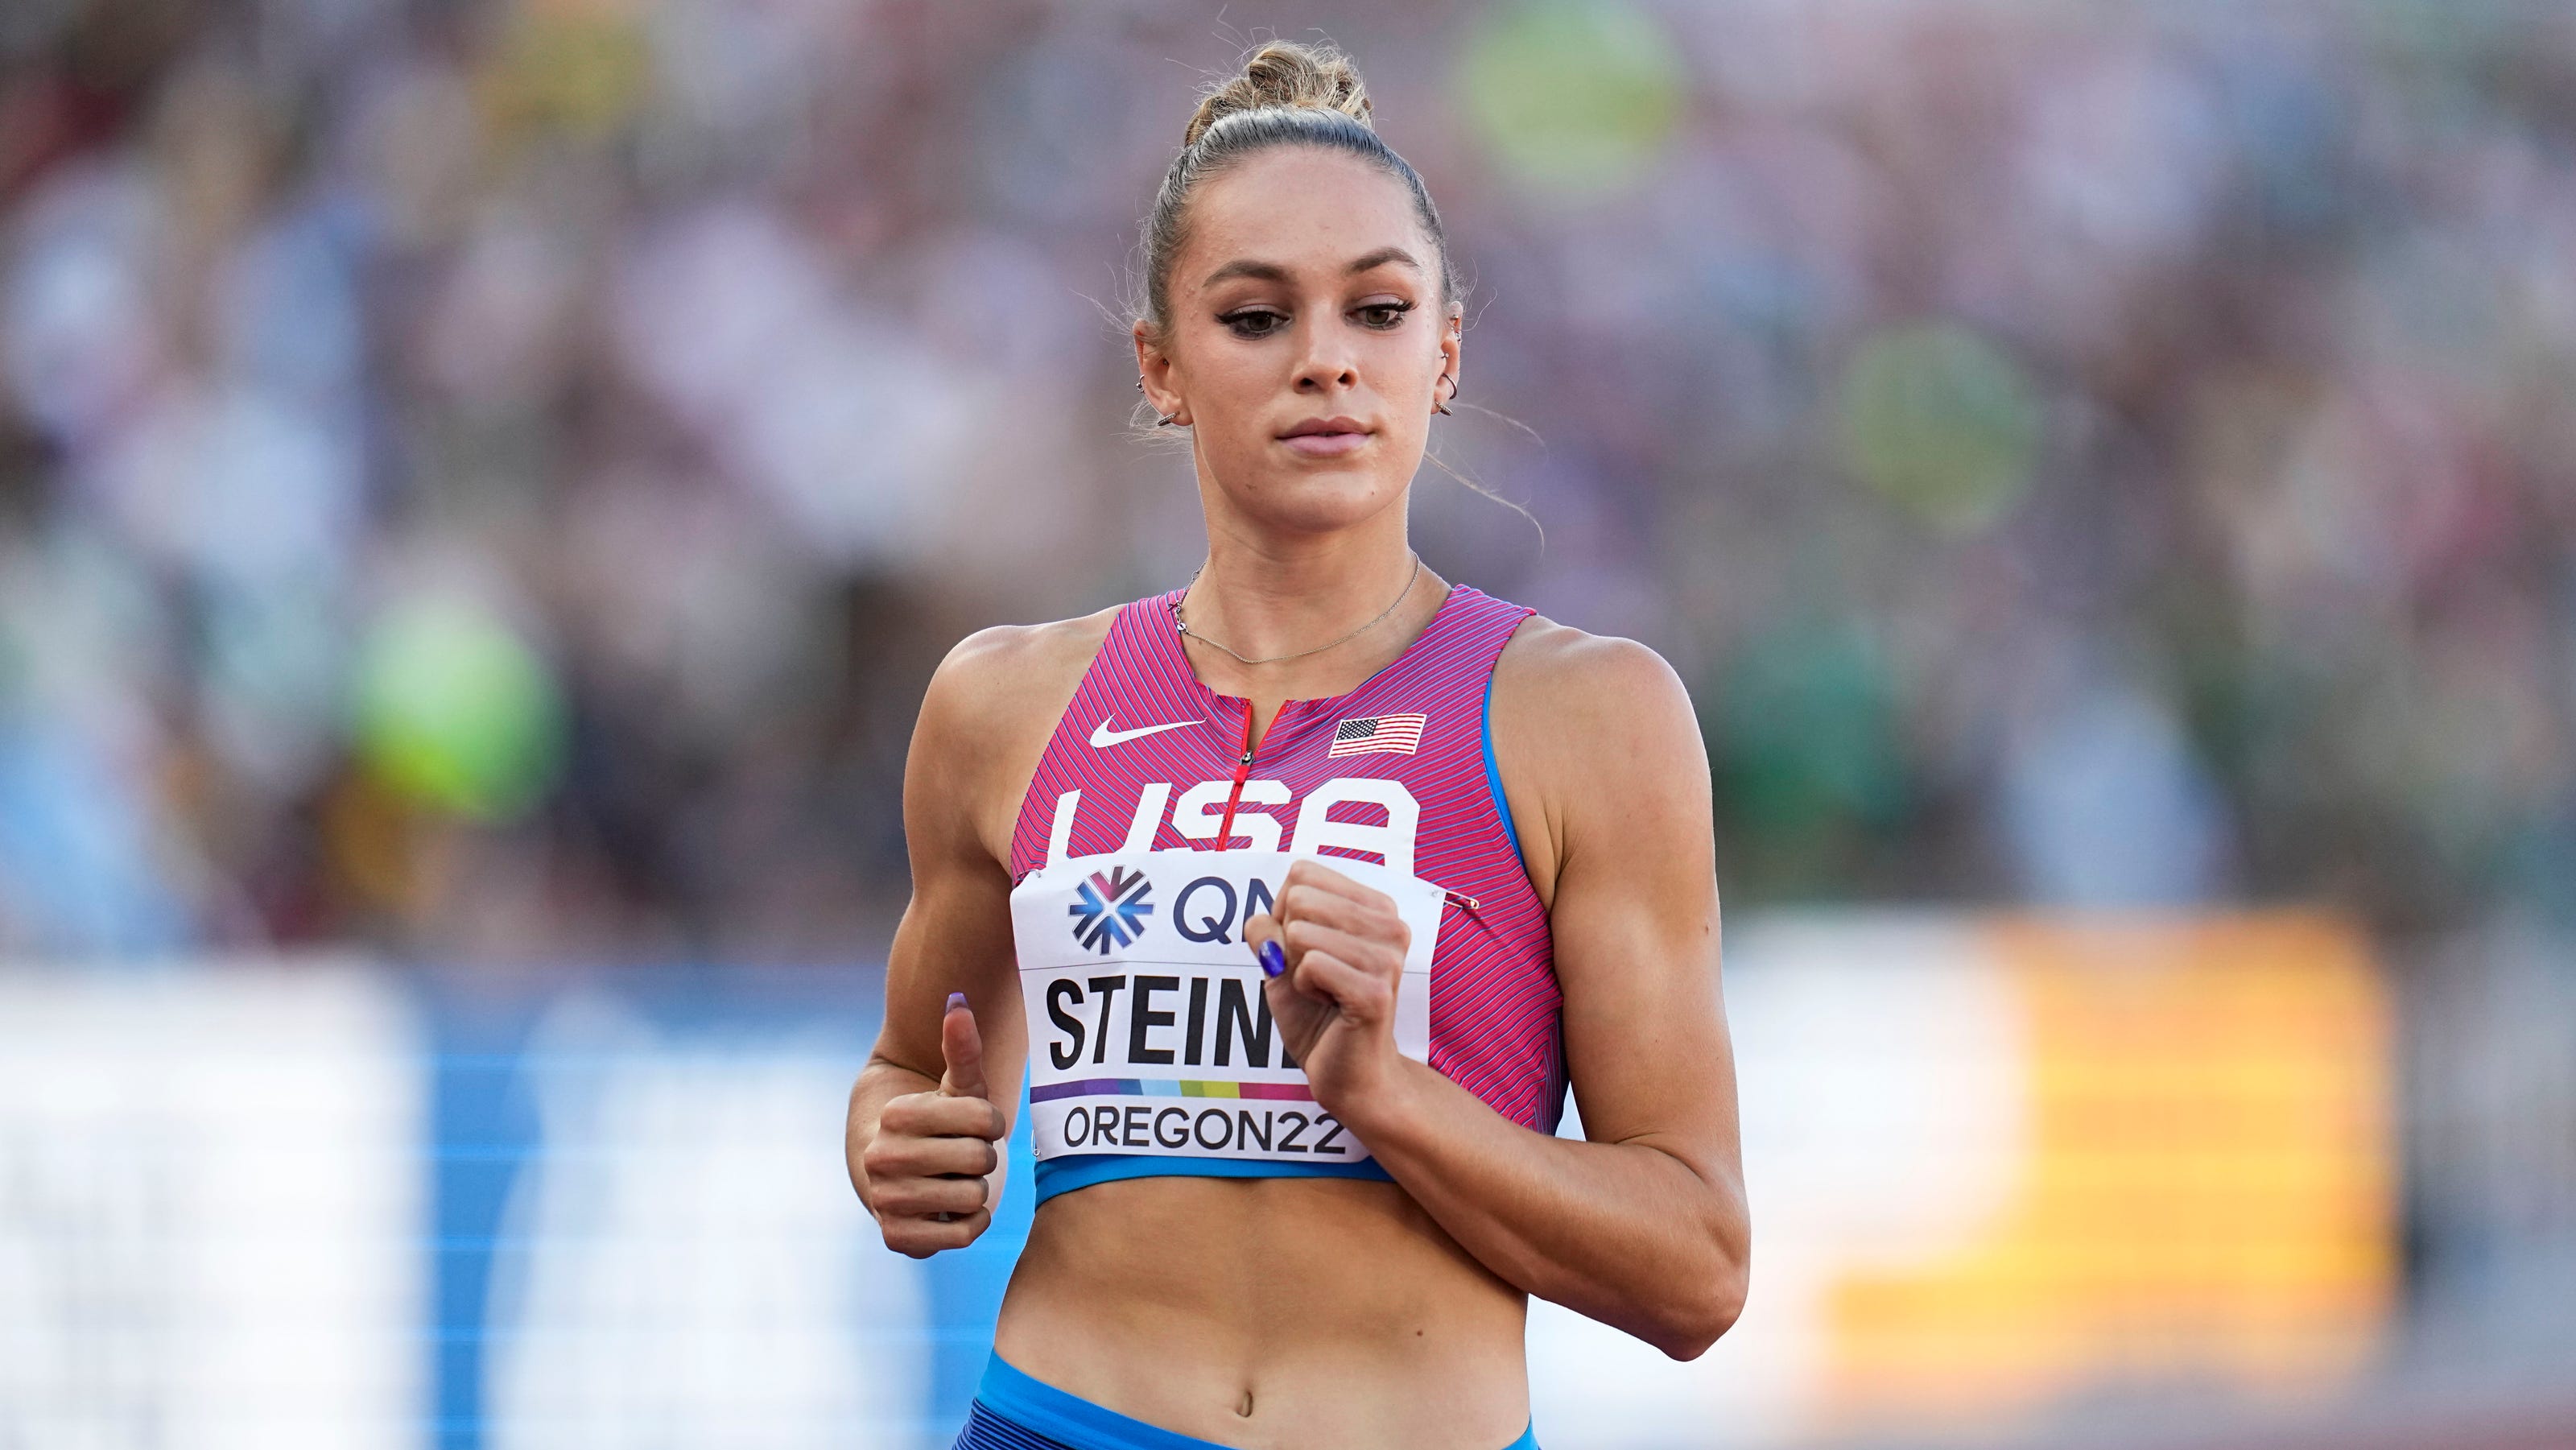 abby-steiner-how-to-watch-dublin-coffman-grad-at-world-championships